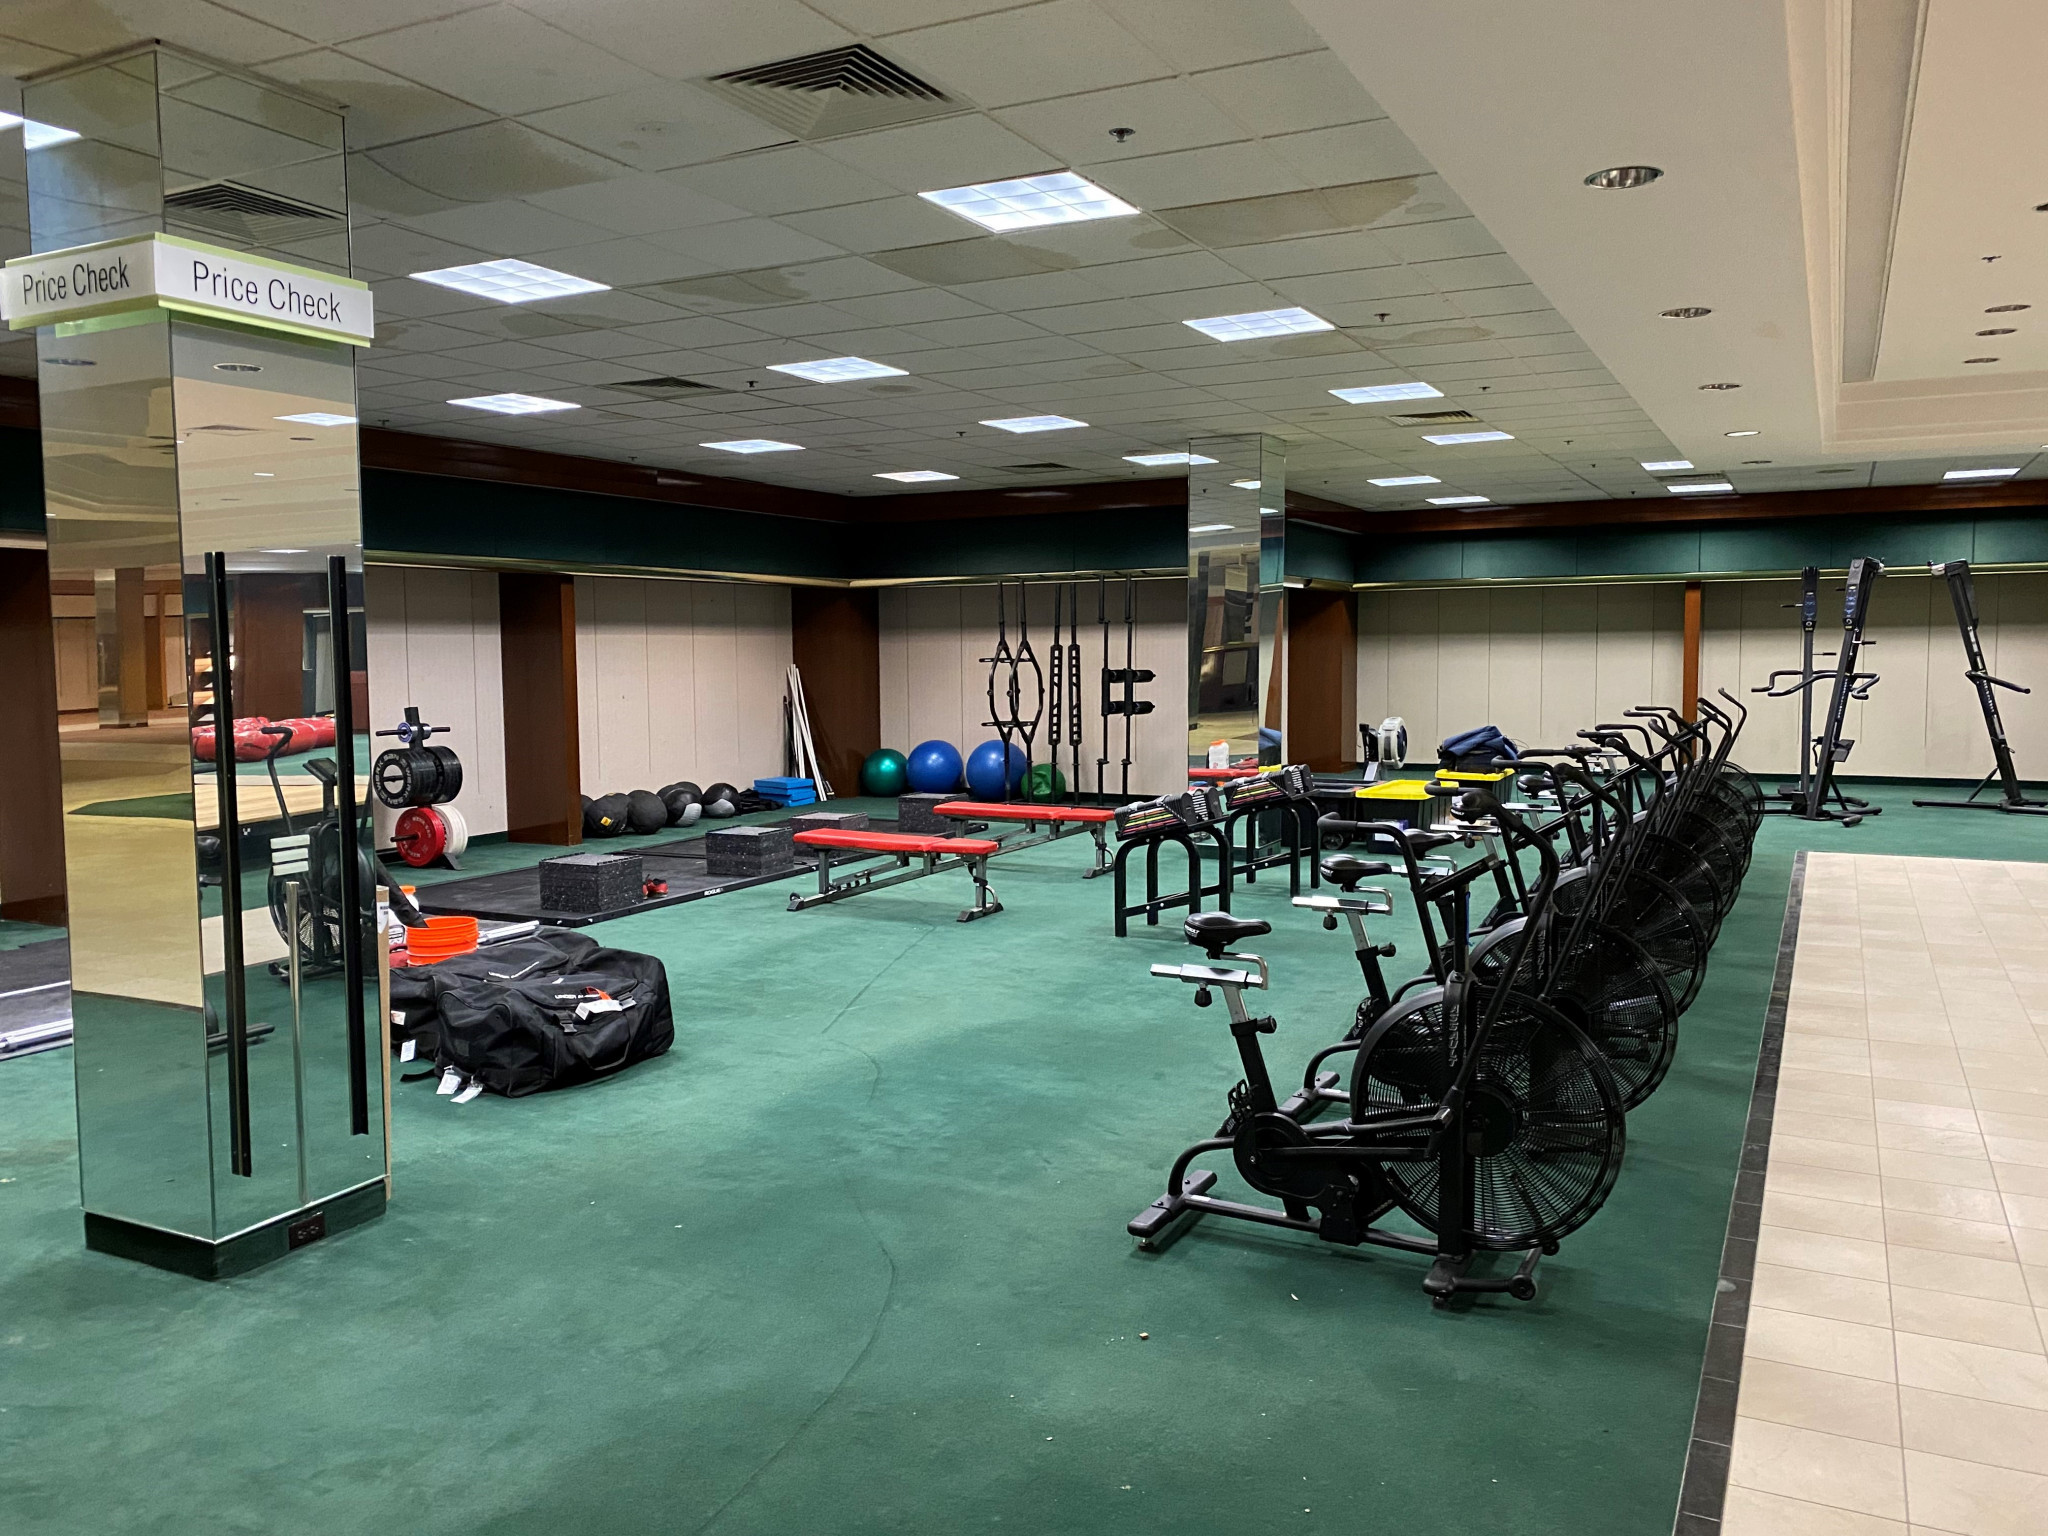 USA Boxing convert department store into training facility in preparation for Tokyo 2020